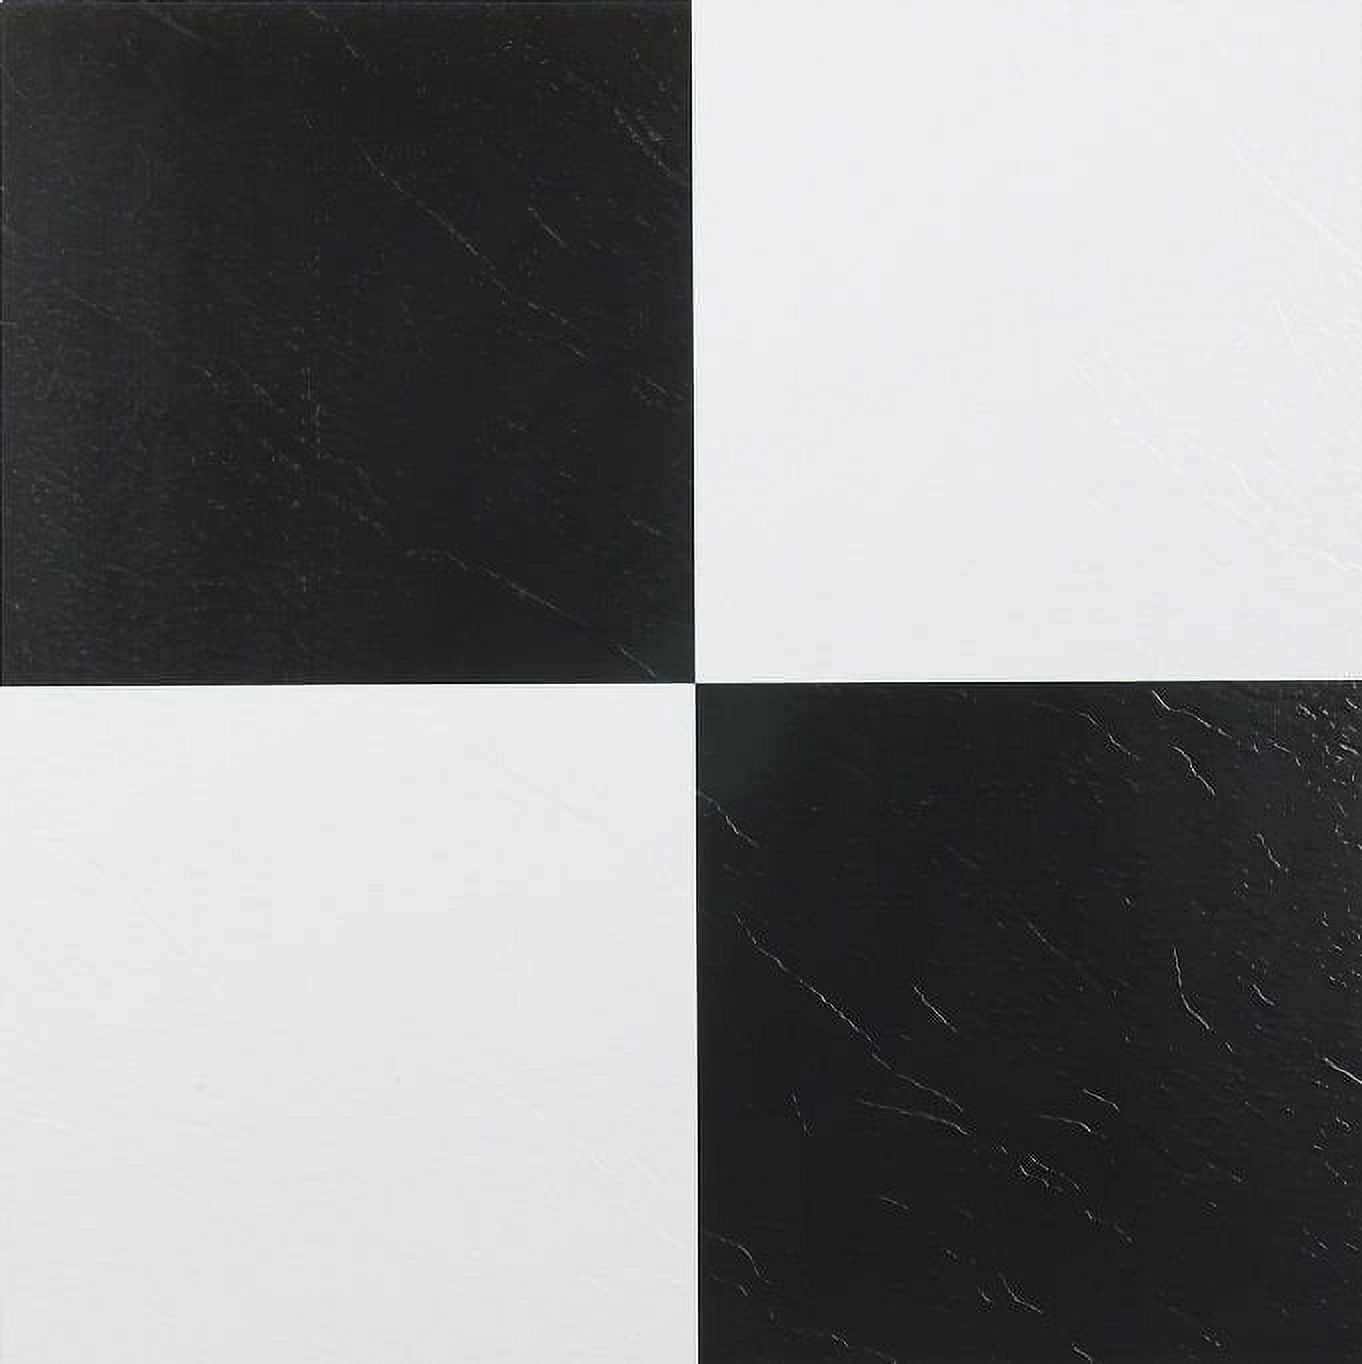 Black & White Checkered Vinyl Floor Tiles Adhesive Stick and Peel 12'' x 12'' 2-Pack (40 Pieces) - image 1 of 2